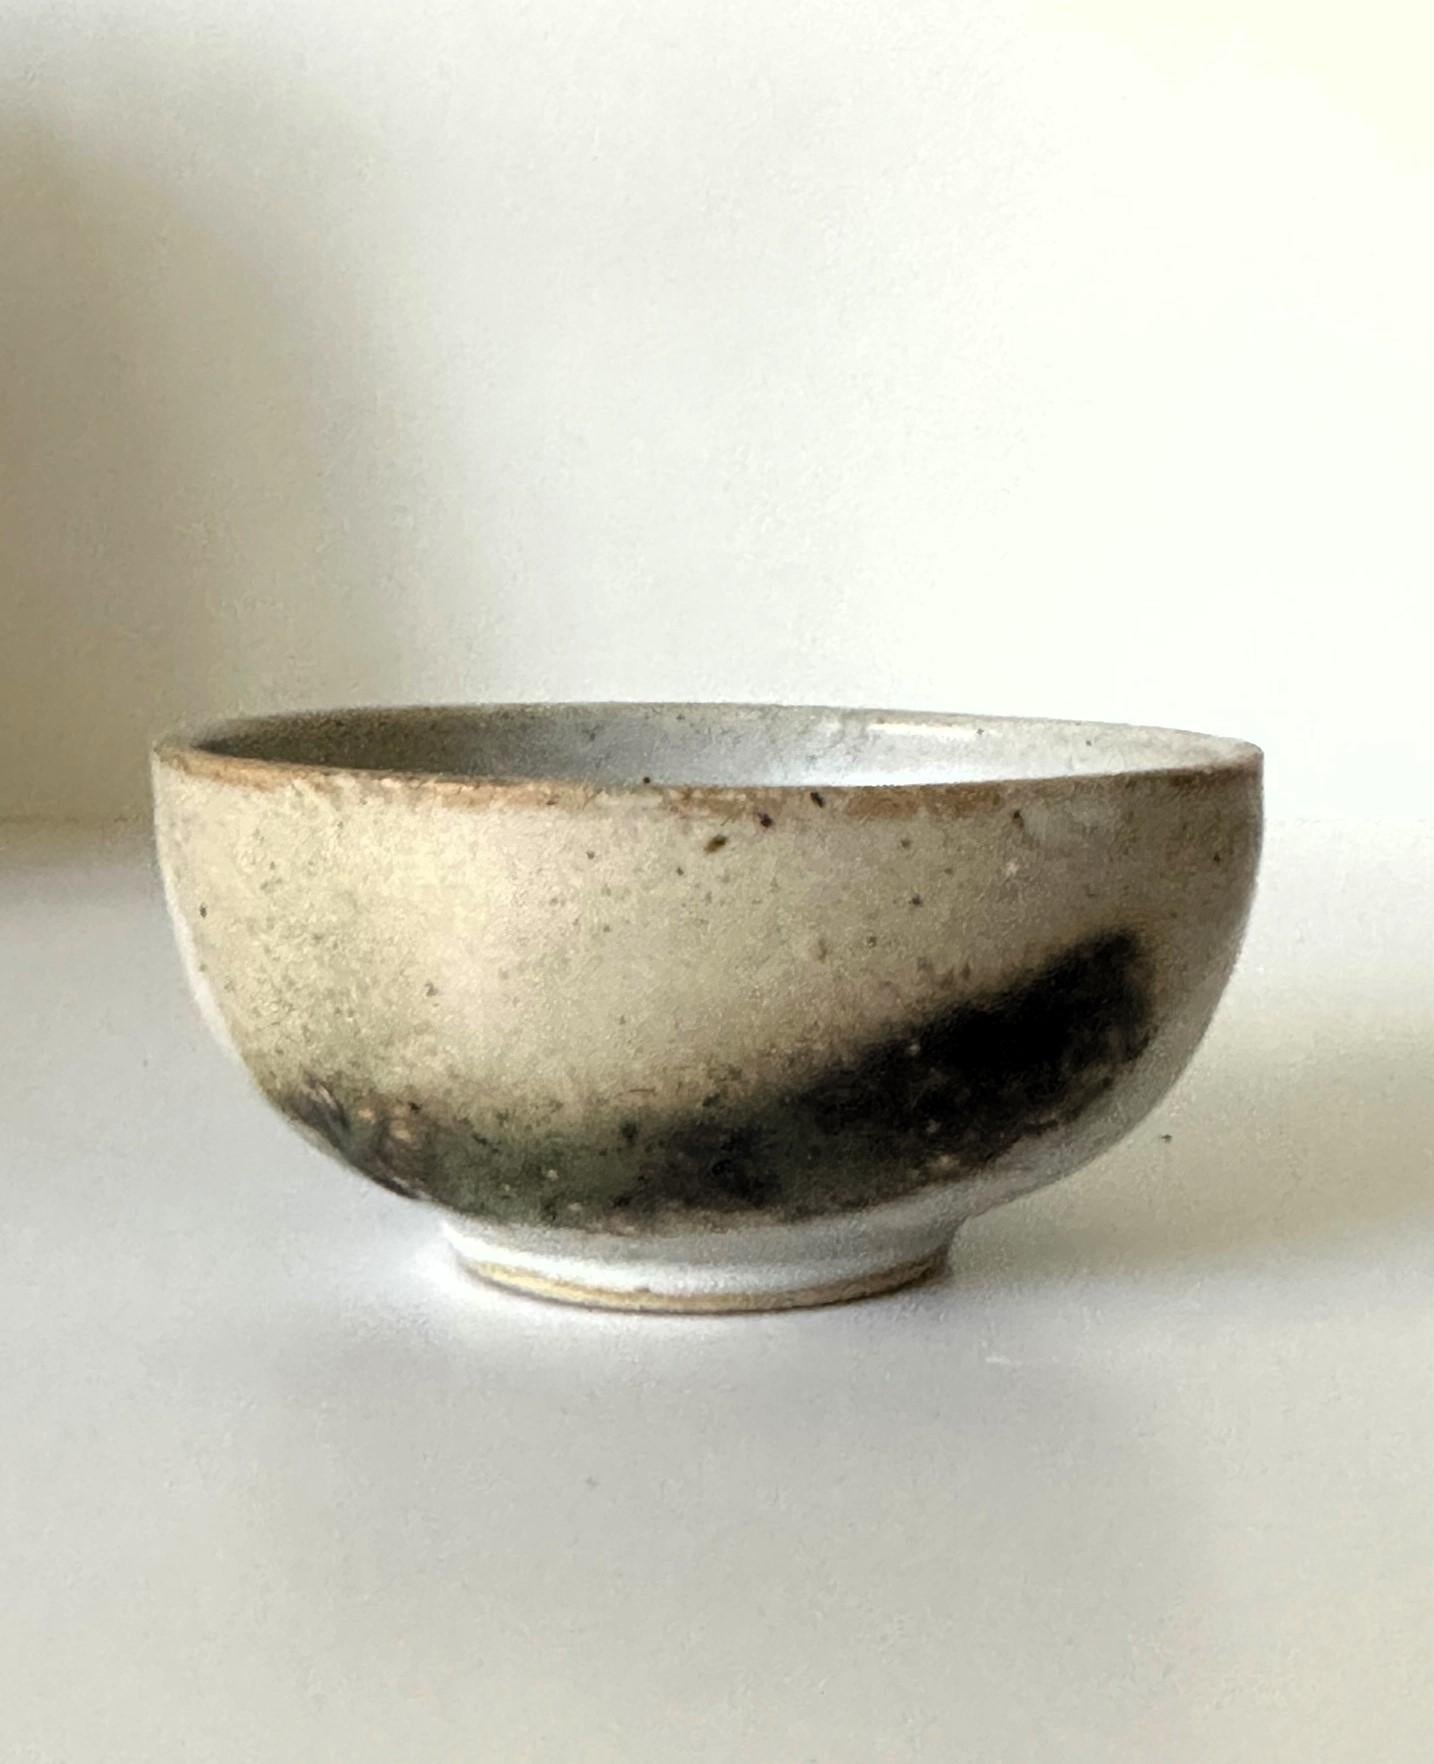 A small elegant glazed ceramic tea bowl (chawan) by Japanese American artist Toshiko Takaezu (American, 1922 - 2011). The well-balanced form is hand built and shows just a slight irregularity. The surface is covered with a white opaque glaze with a